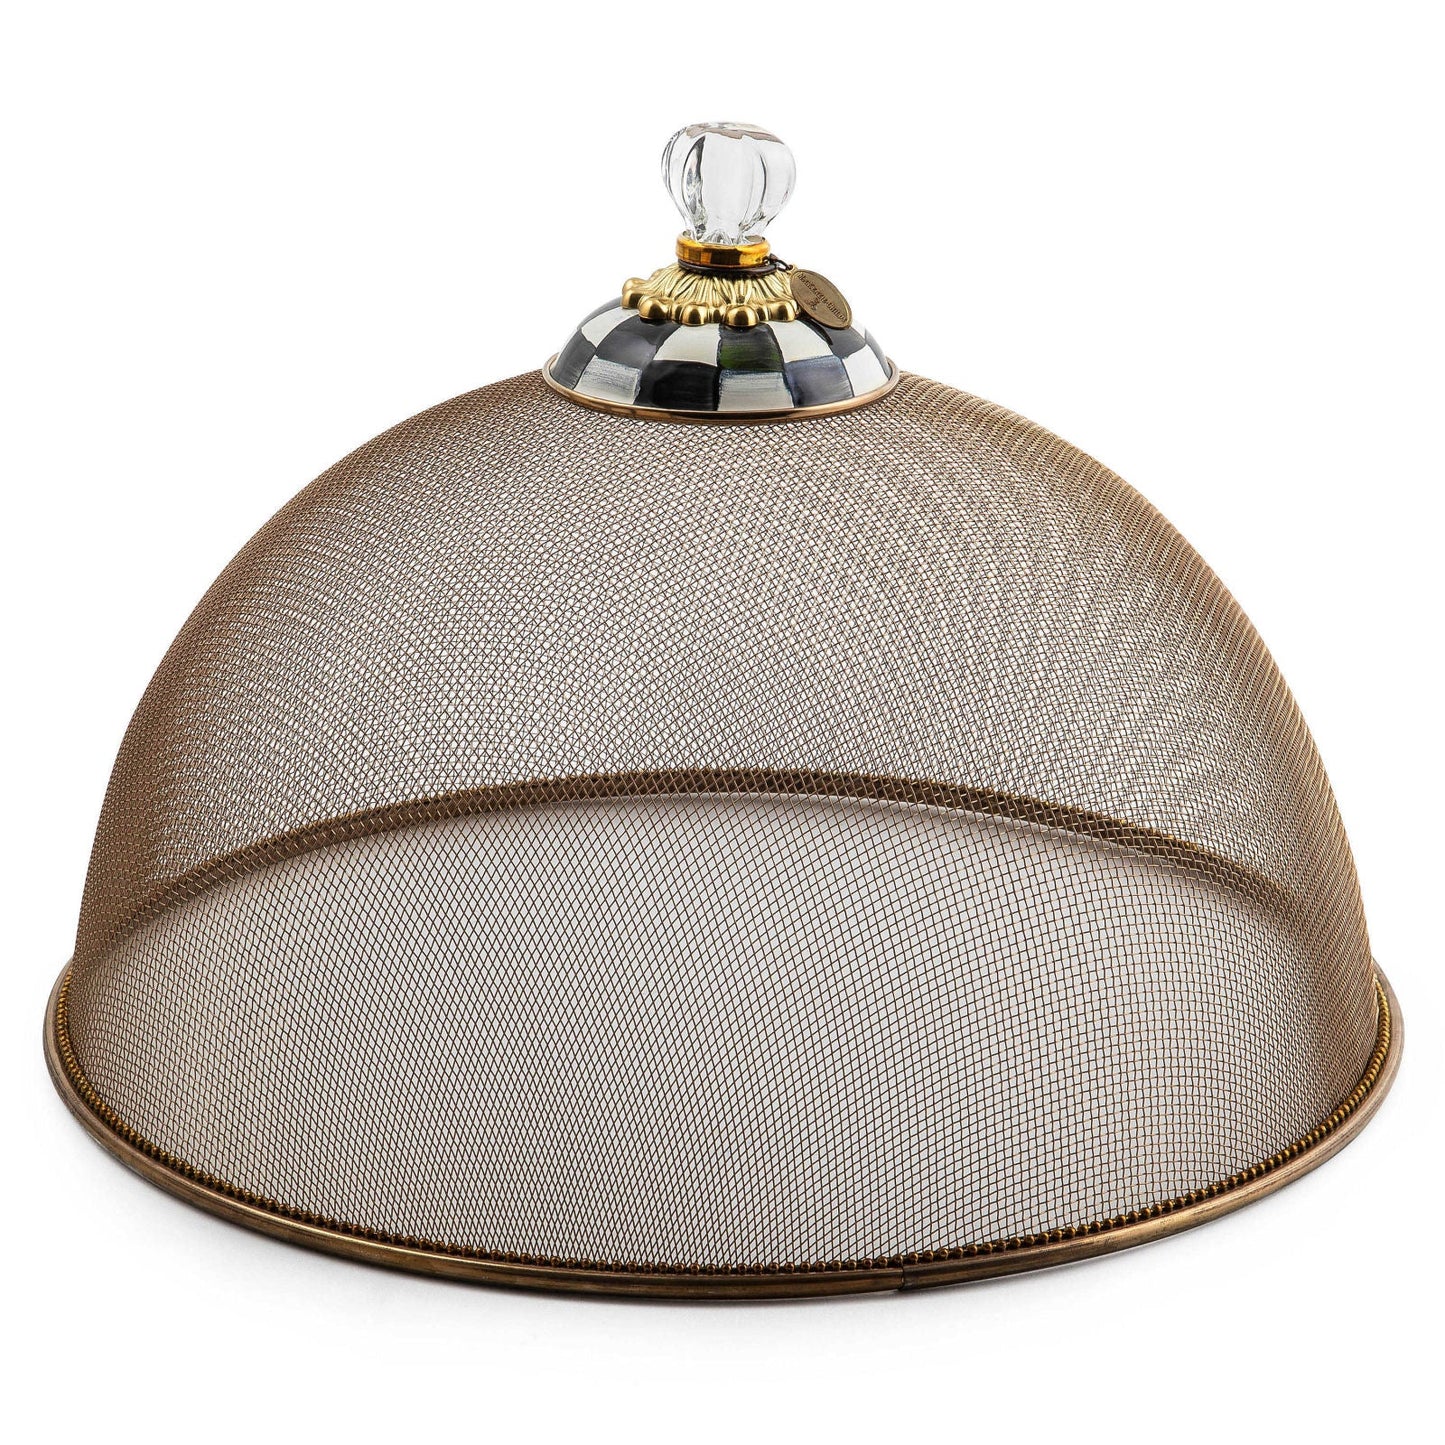 Courtly Check Mesh Dome - Large by Mackenzie Childs - |VESIMI Design| Luxury and Rustic bathrooms online